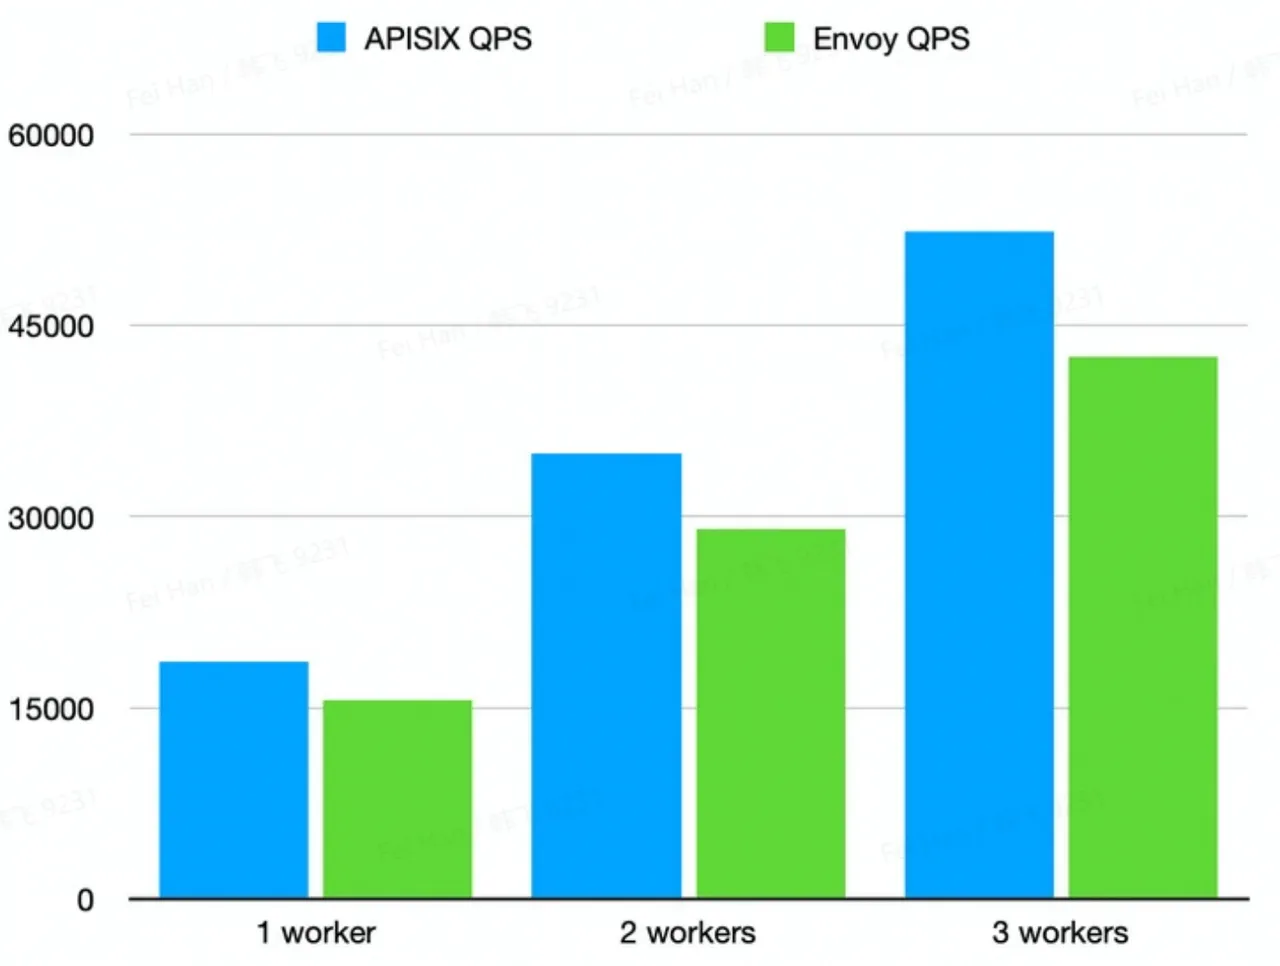 Performance Comparison between Apache APISIX and Envoy based on QPS